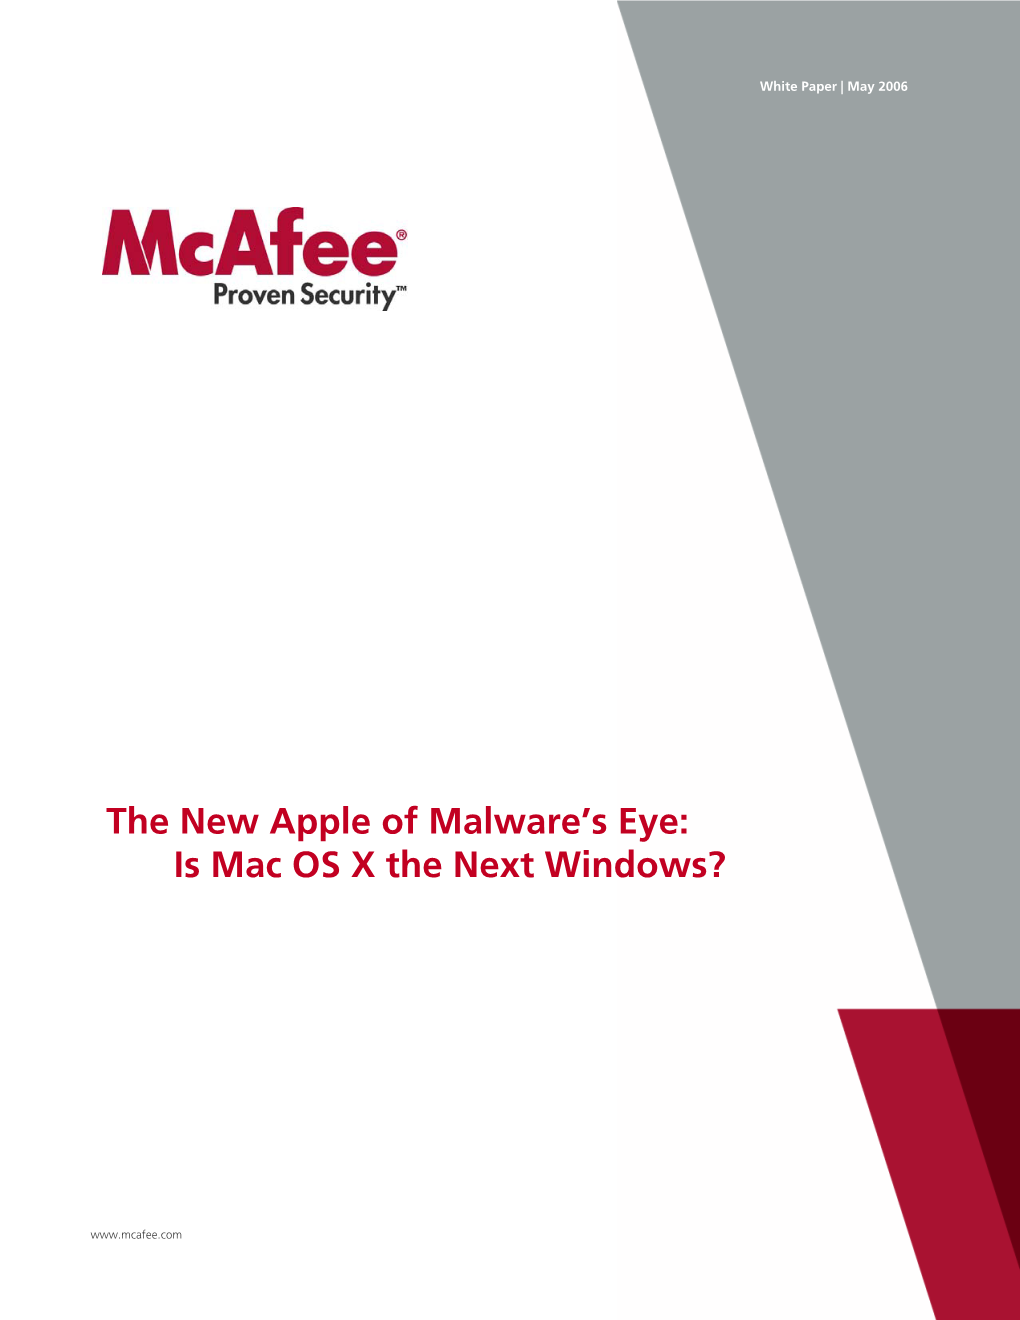 The New Apple of Malware's Eye: Is Mac OS X the Next Windows?